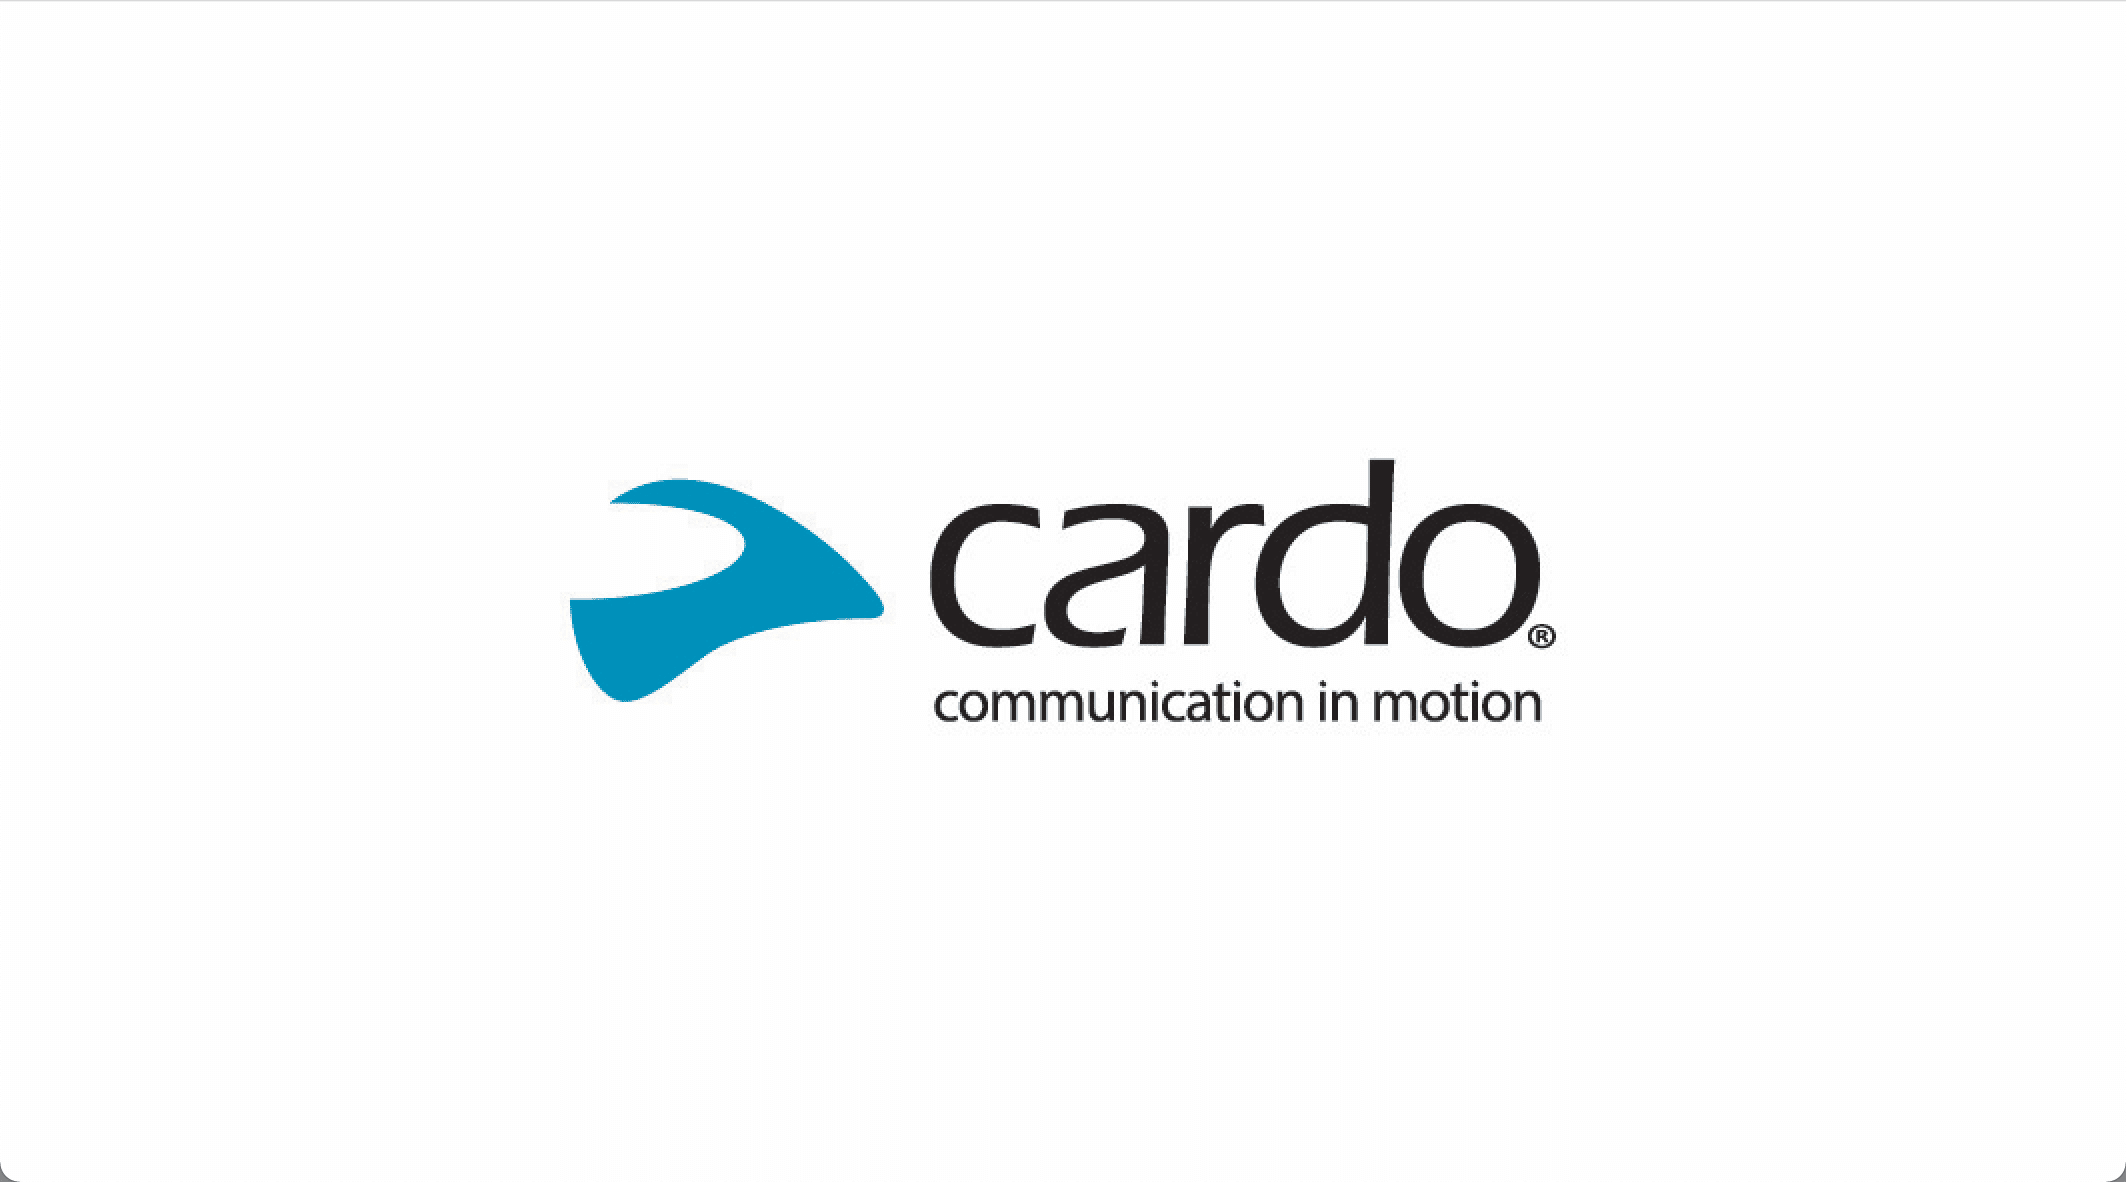 Cardo Teams Up With Midland and Uclear to Launch Open Bluetooth Intercom